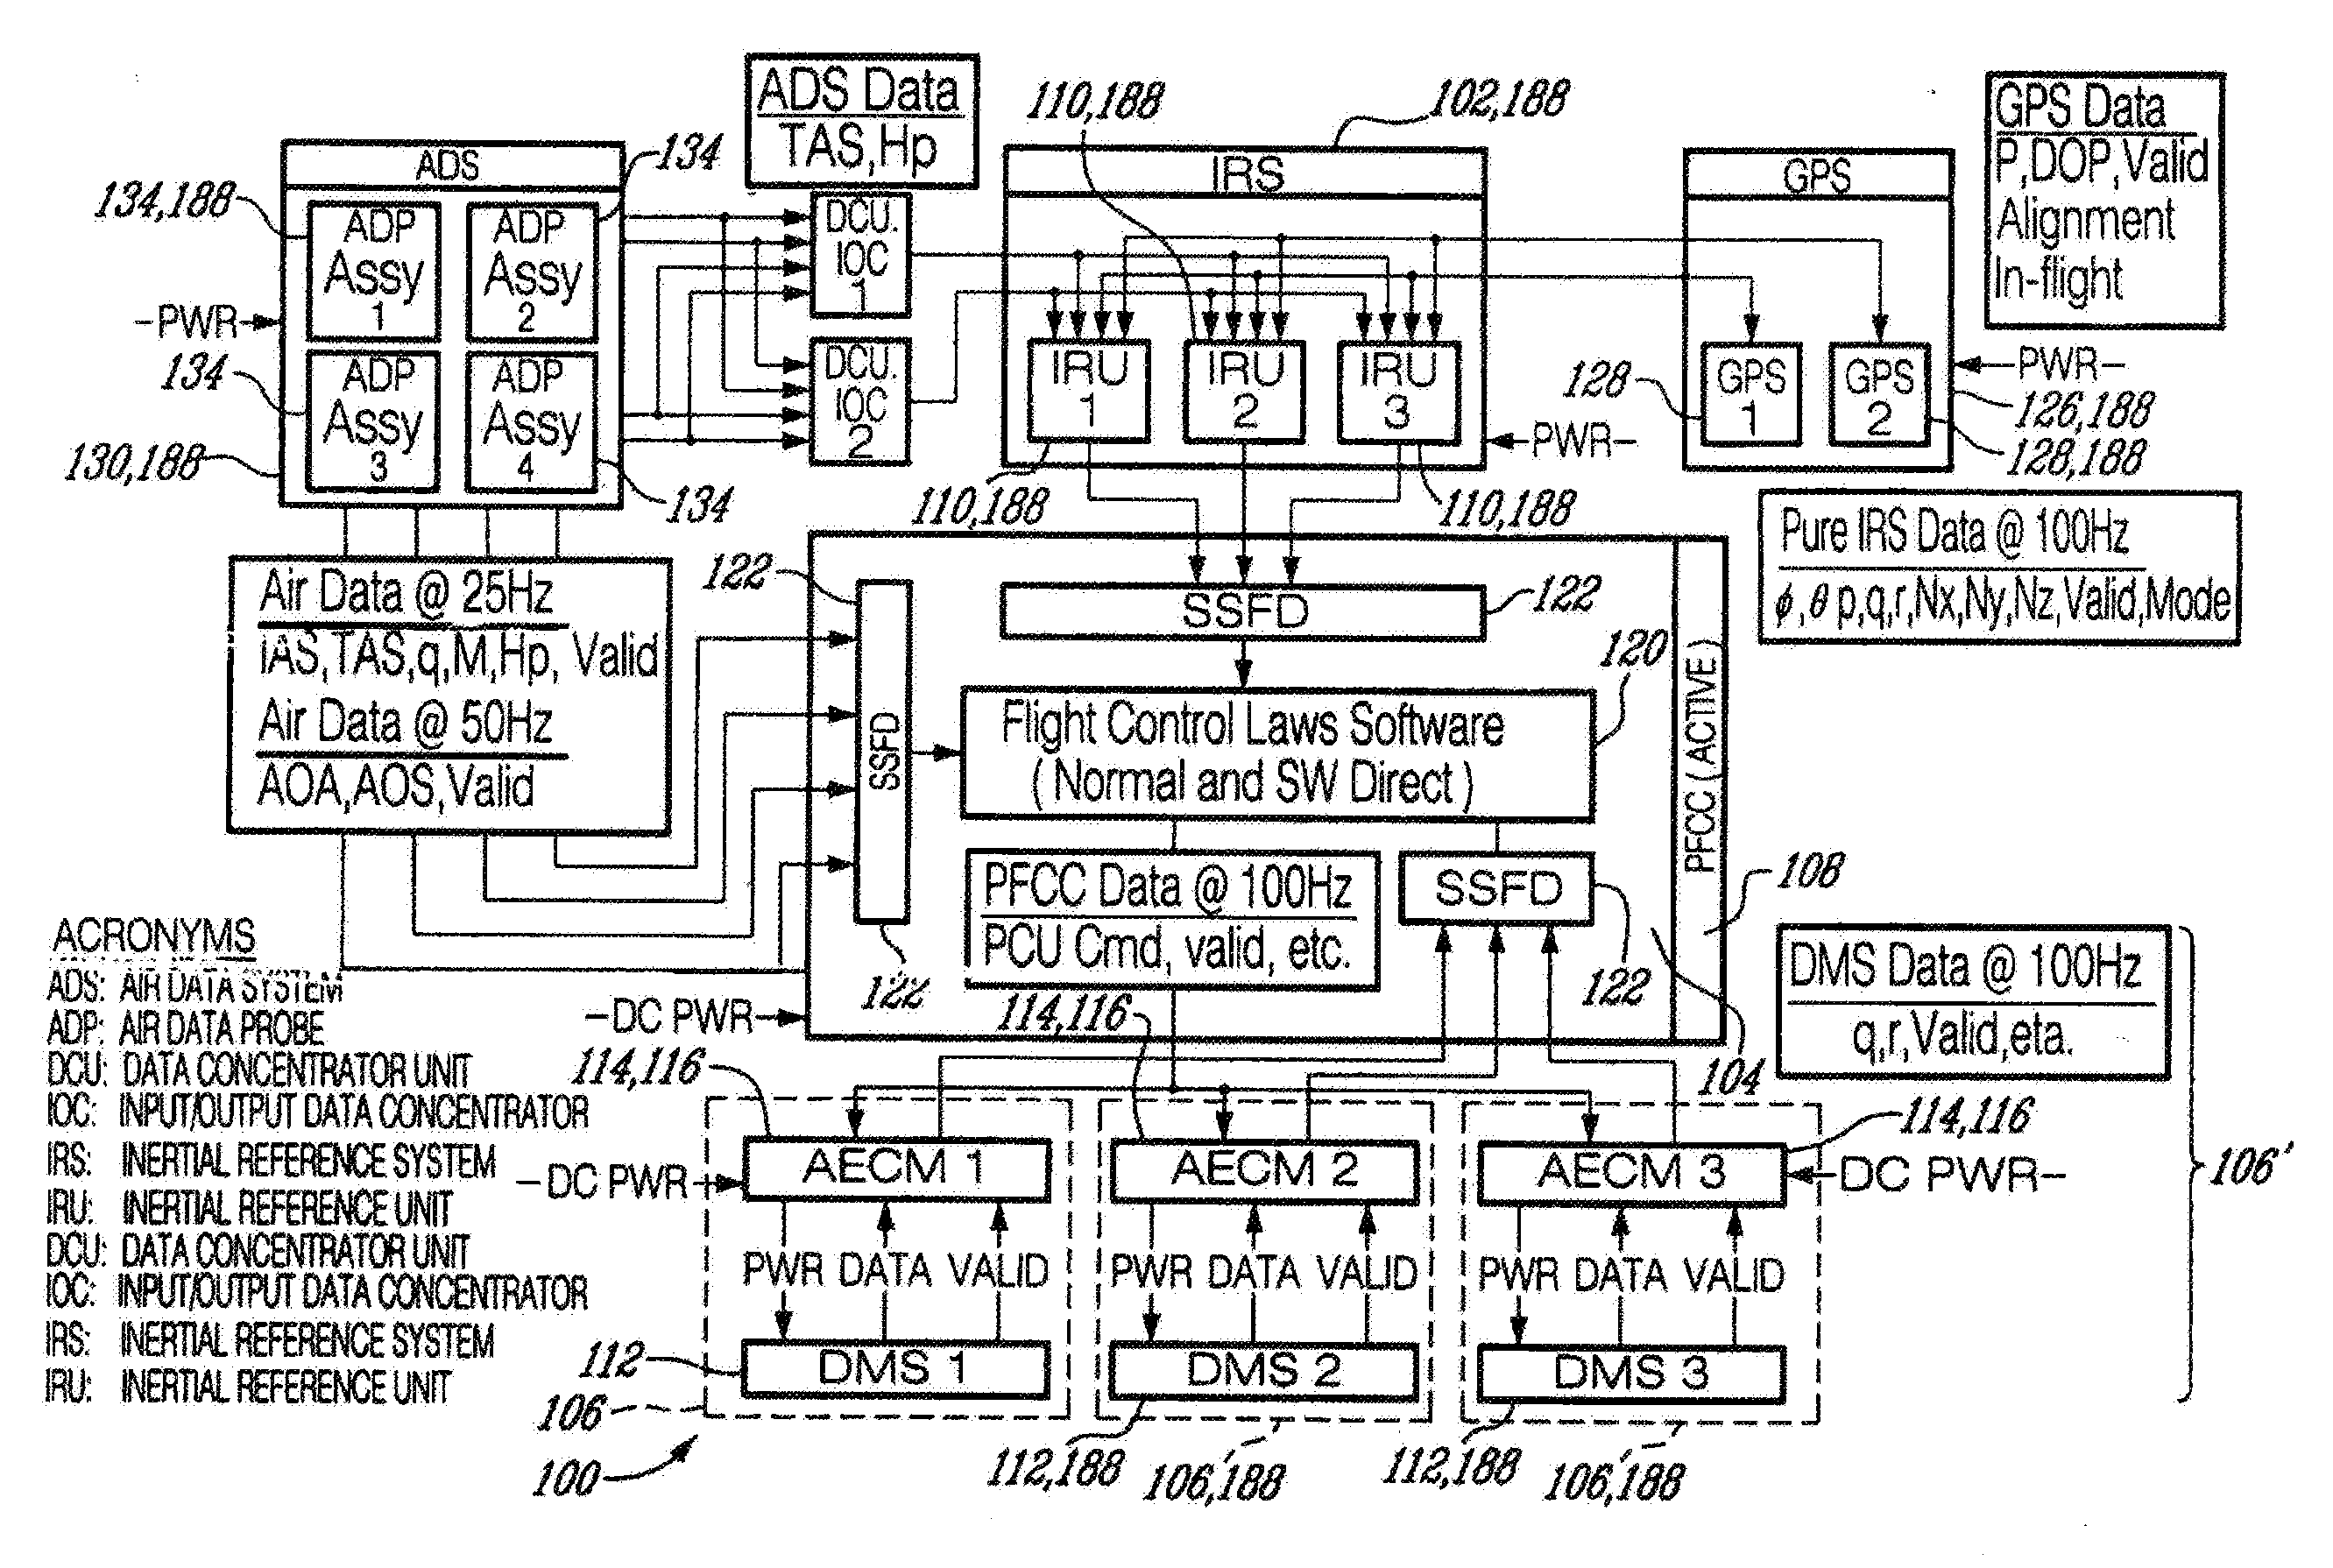 Integrity monitoring of inertial reference unit